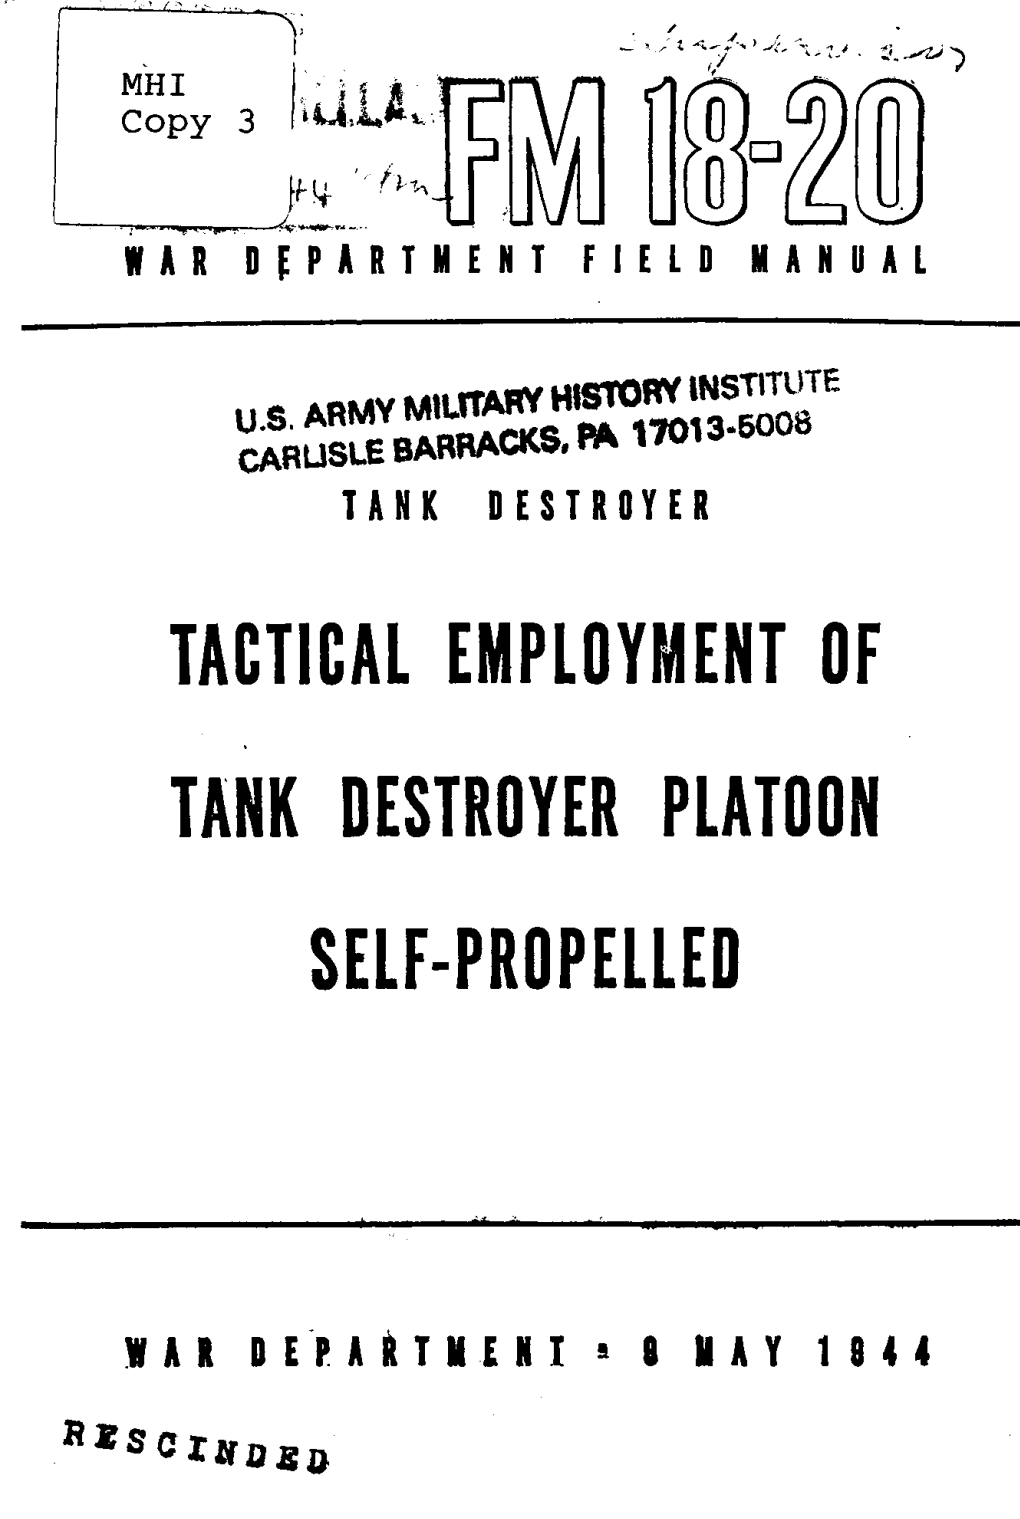 Tactical Employment of Tank Destroyer Platoon Self-Propelled